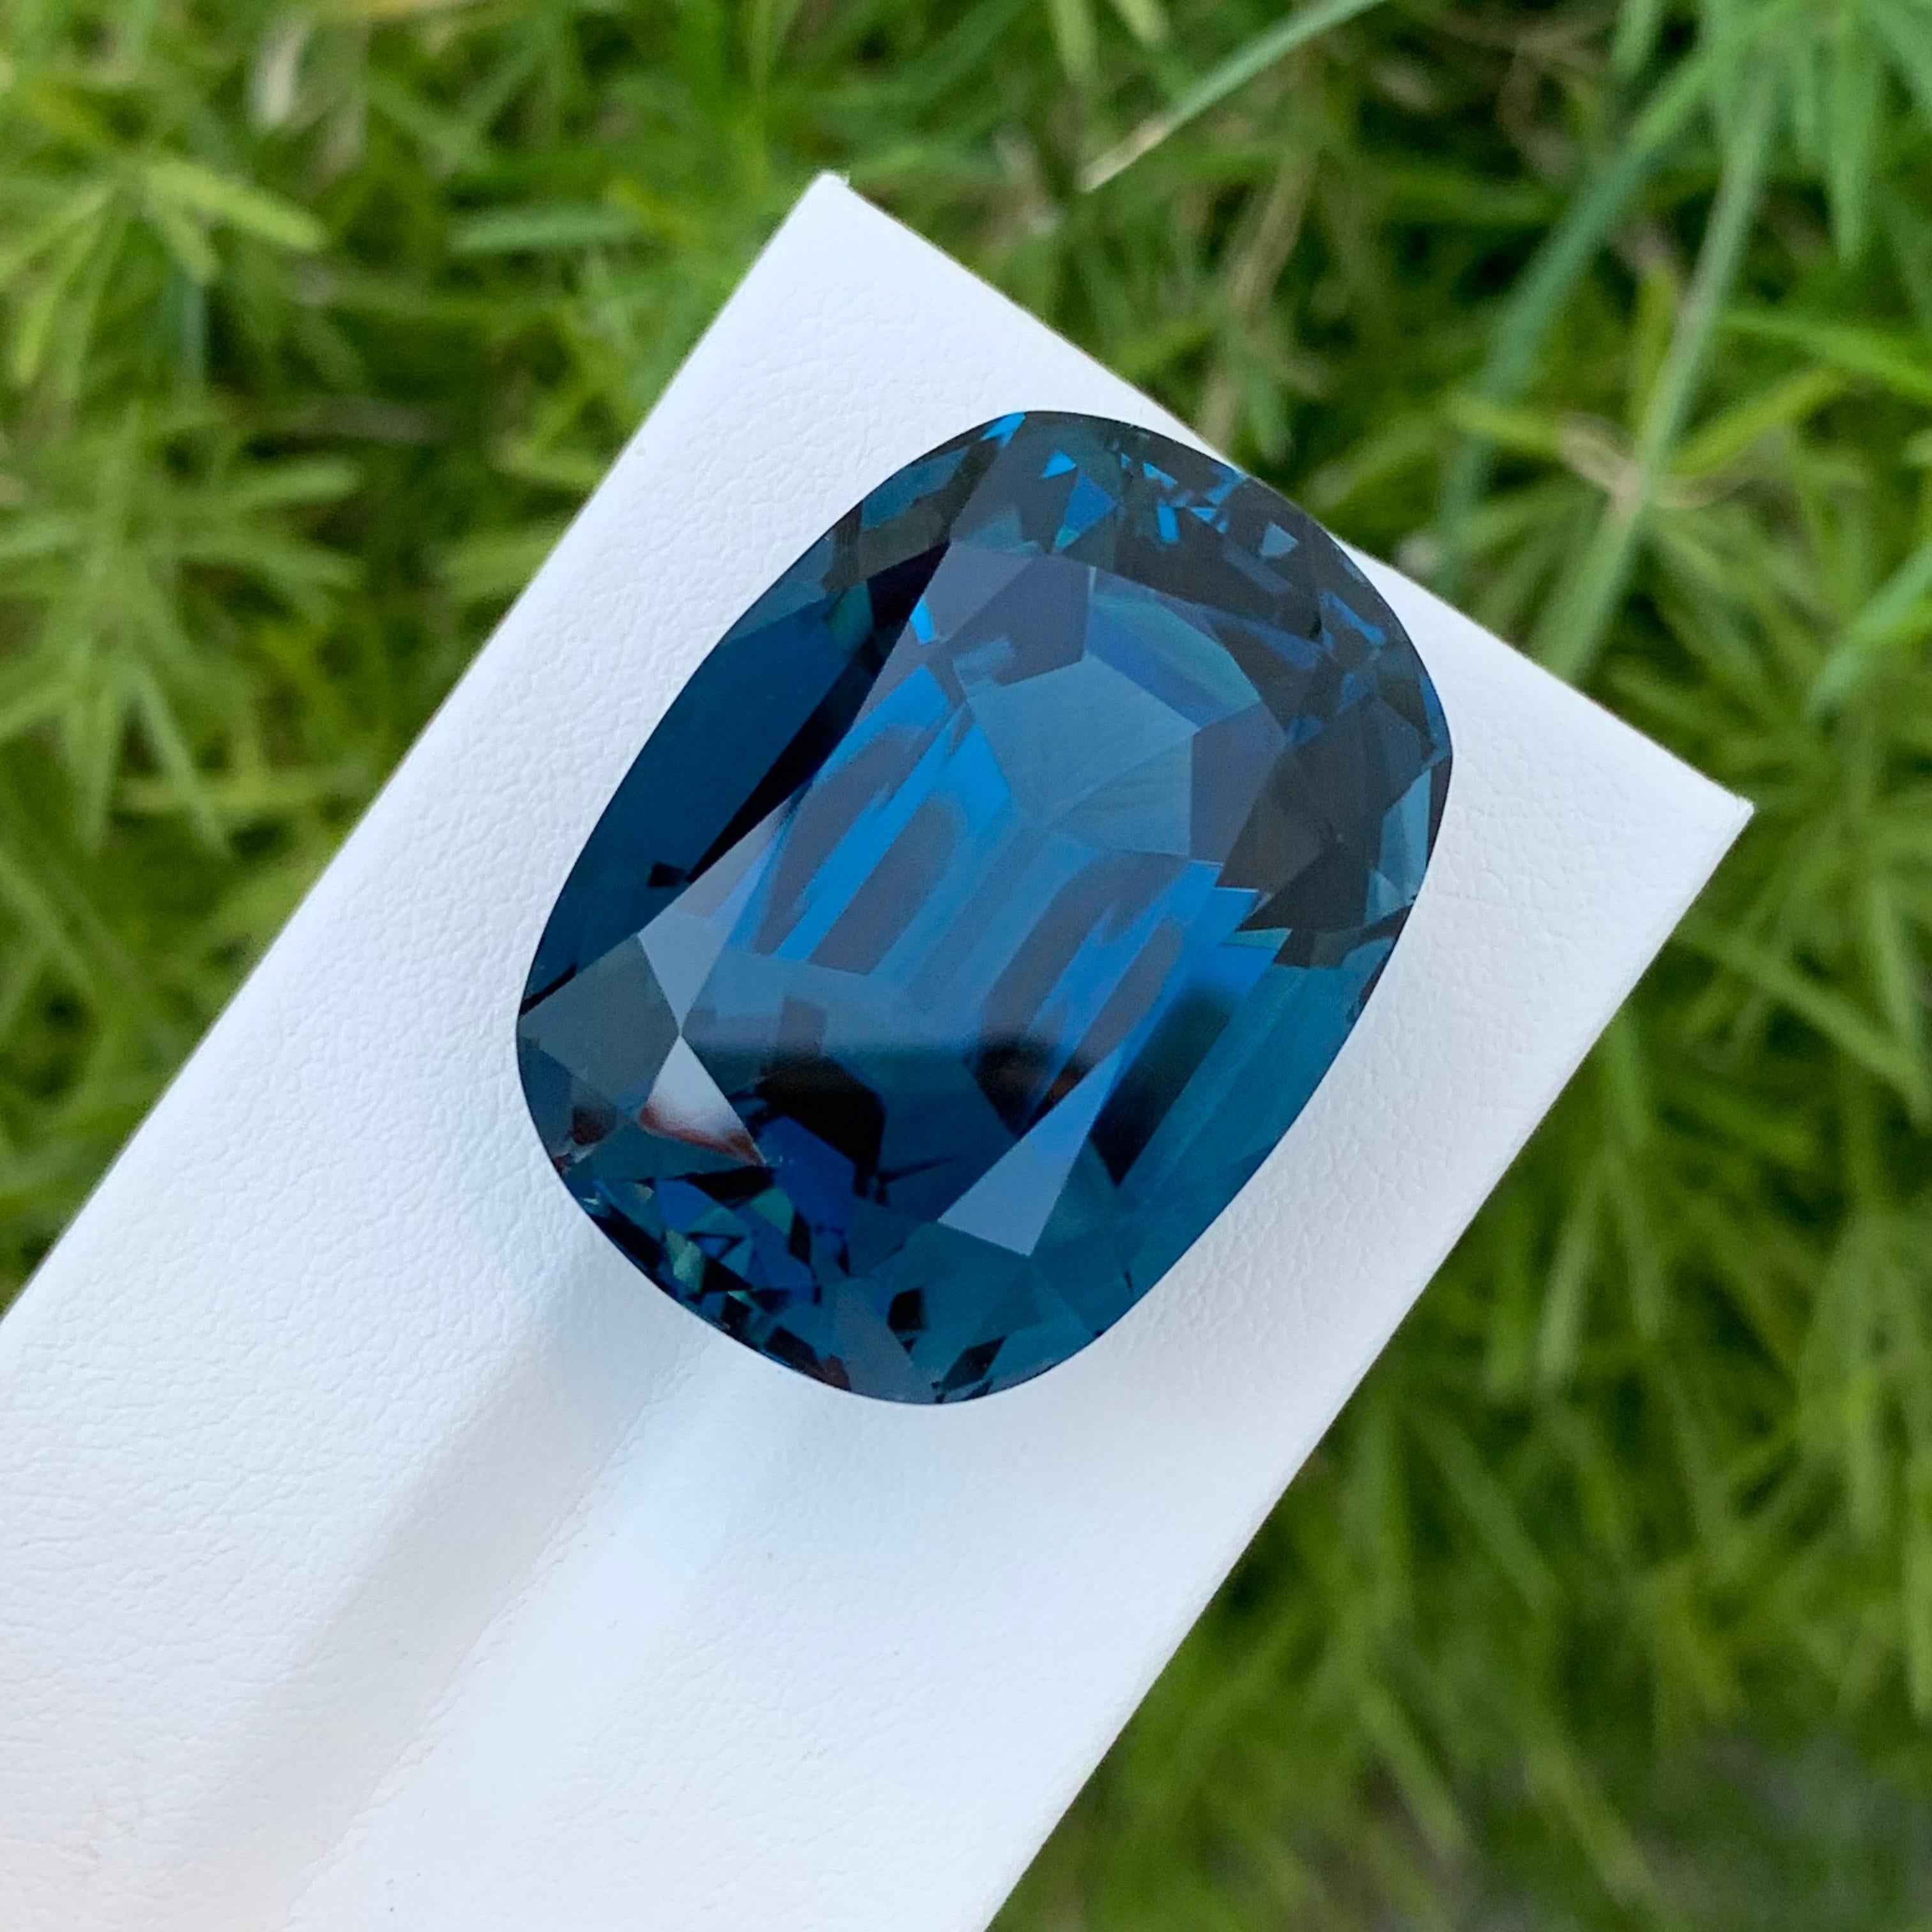 Loose London Blue Topaz

Weight: 80.80 Carats
Dimension: 27 x 21 x 16.5 Mm
Origin: Brazil
Shape: long Cushion
Color: Deep Blue
Certificate: On Customer Demand

London Blue Topaz is a mesmerizing variety of topaz renowned for its deep and enchanting